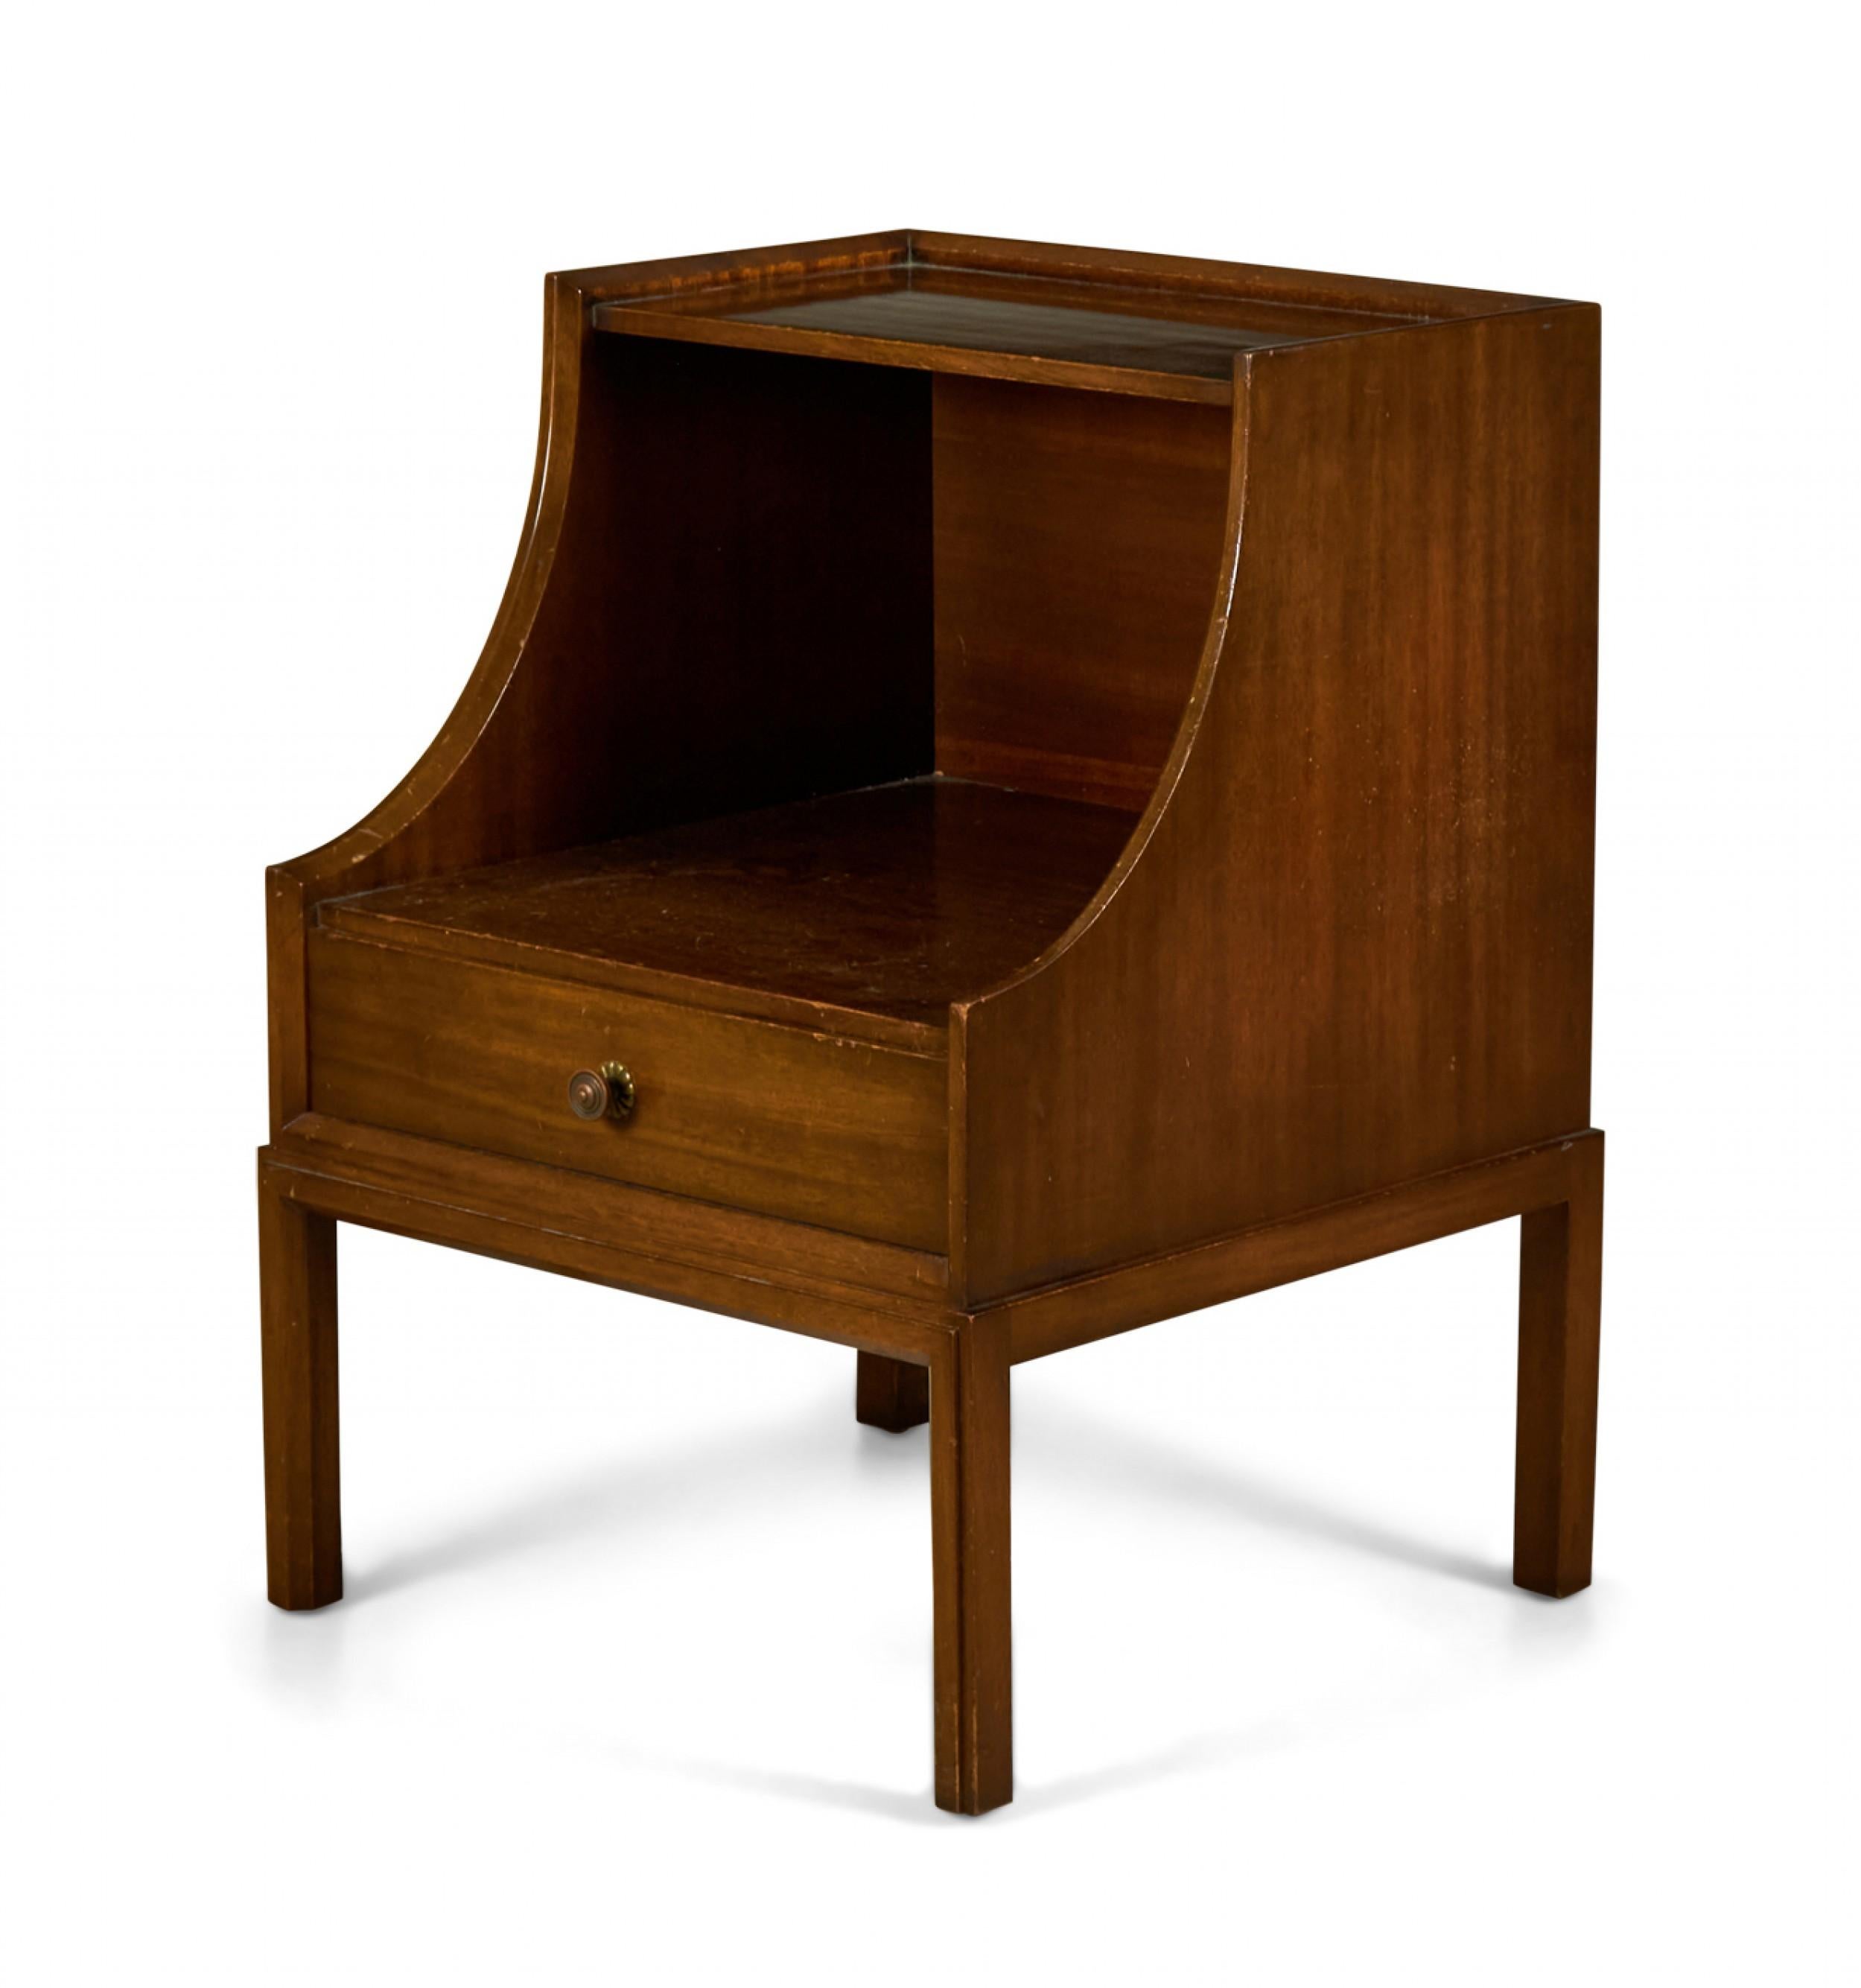 Pair of American mid-century walnut bedside tables / nightstands with a single drawer under a scoop front open compartment with upper shelf resting on four dowel legs. (Tommi Parzinger)(Priced as Pair).
   